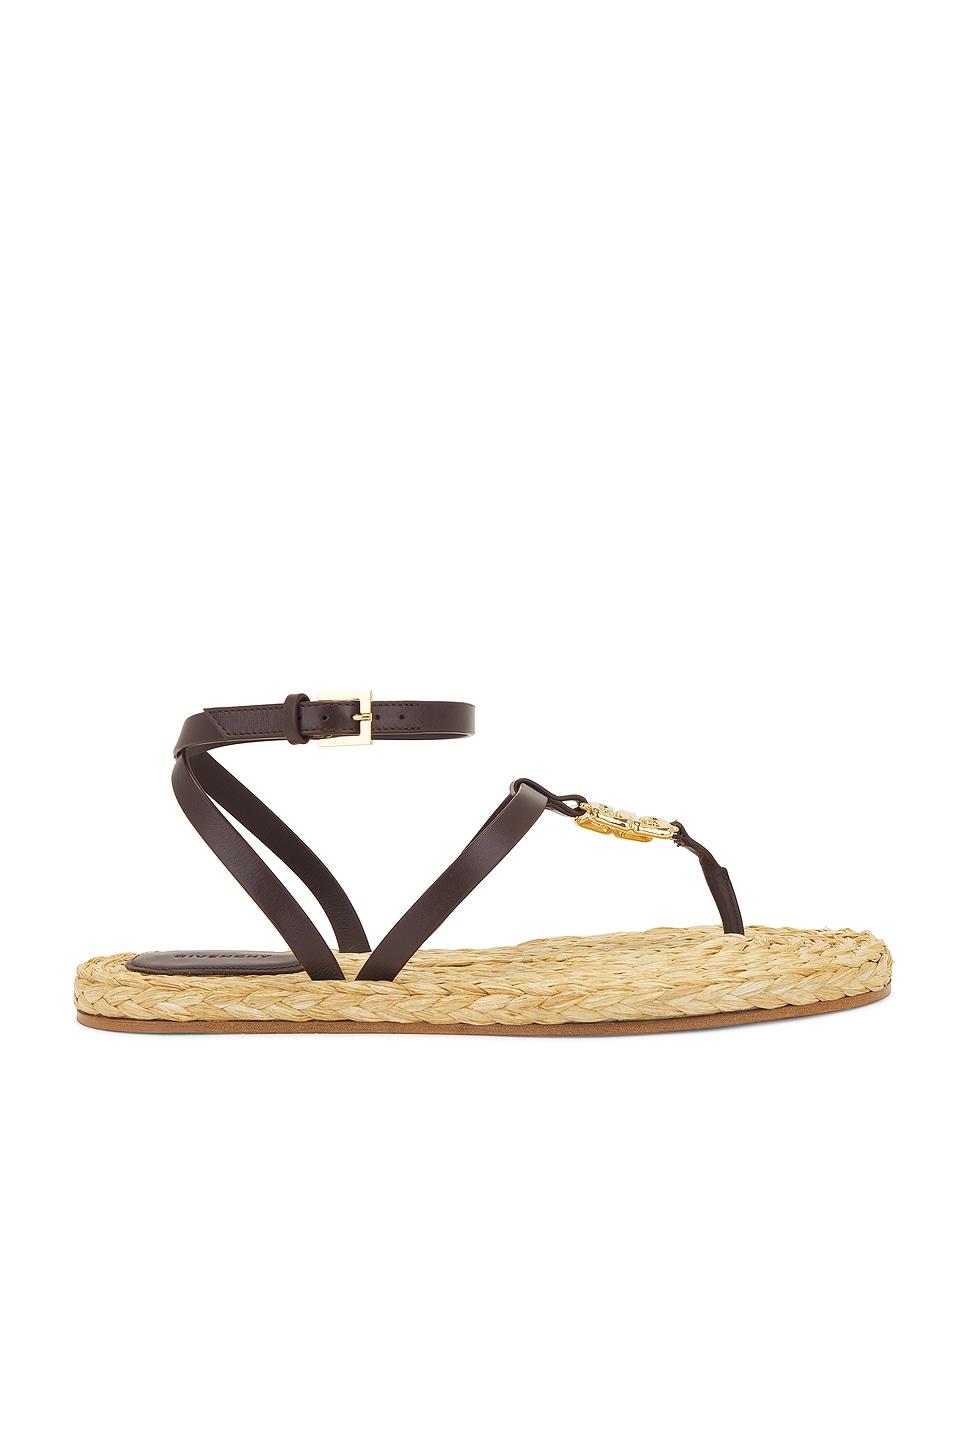 Image 1 of Givenchy 4G Liquid Sandal in Ebony & Natural